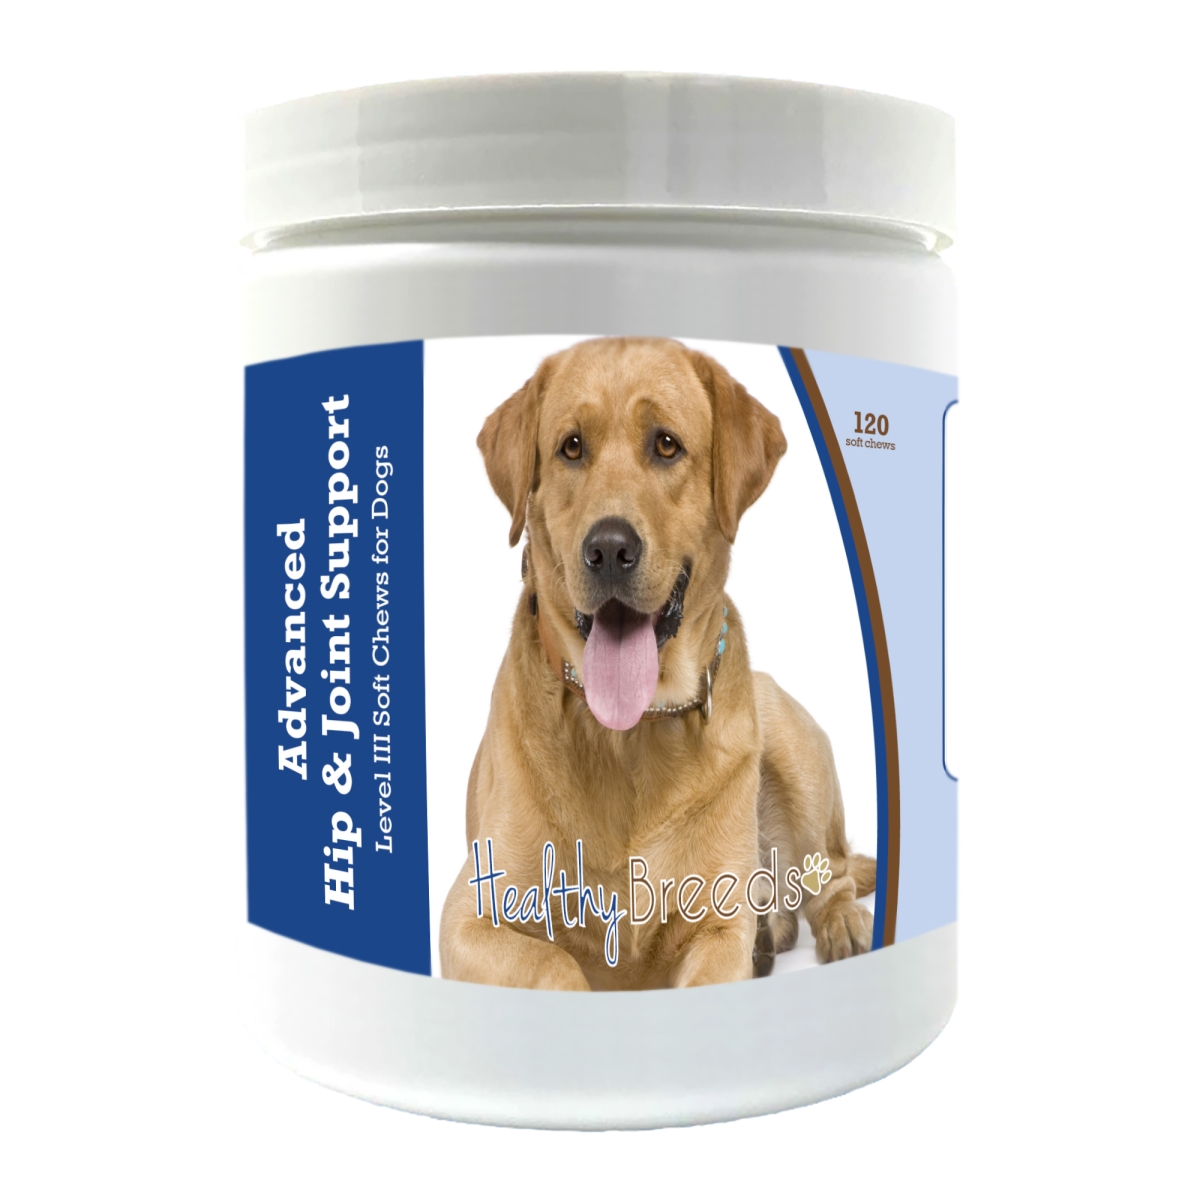 Picture of Healthy Breeds 192959898552 Labrador Retriever Advanced Hip & Joint Support Level III Soft Chews for Dogs